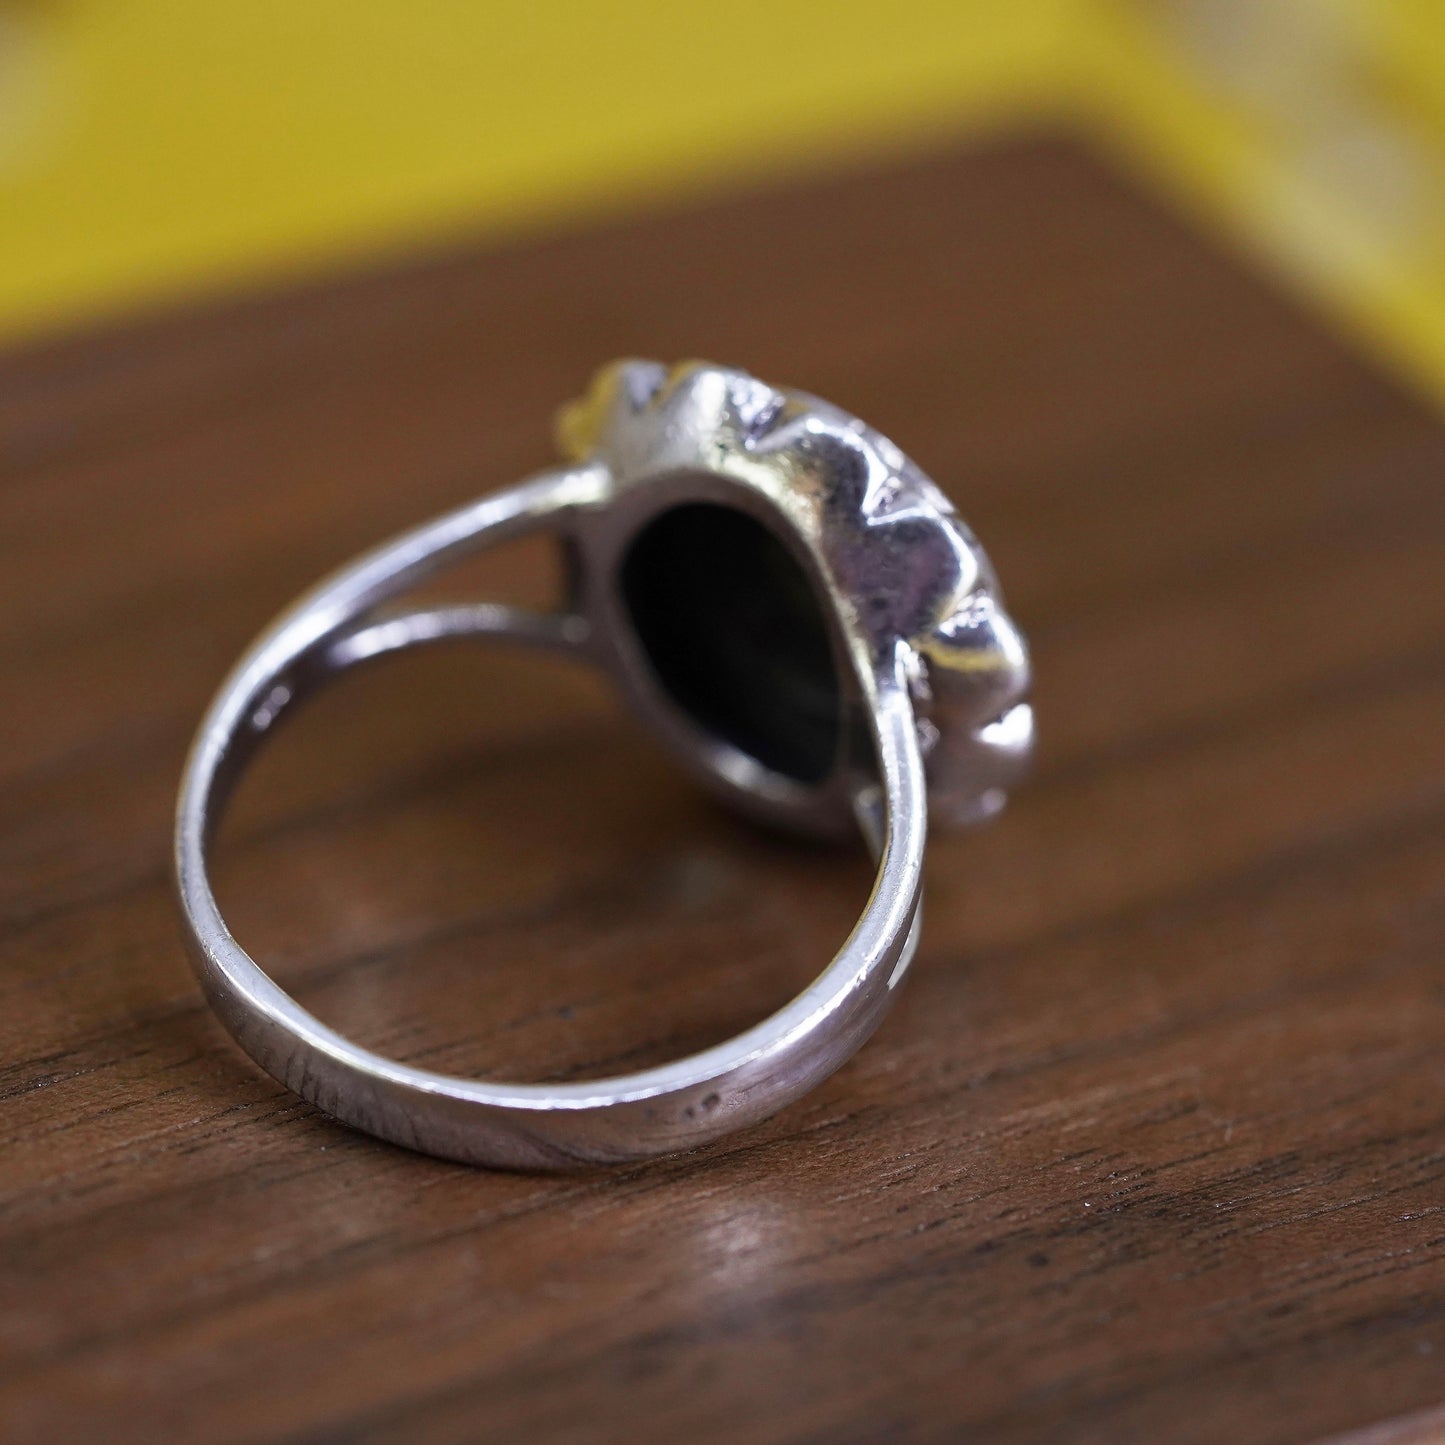 Size 9.25, Sterling 925 silver handmade ring with black onyx and marcasite